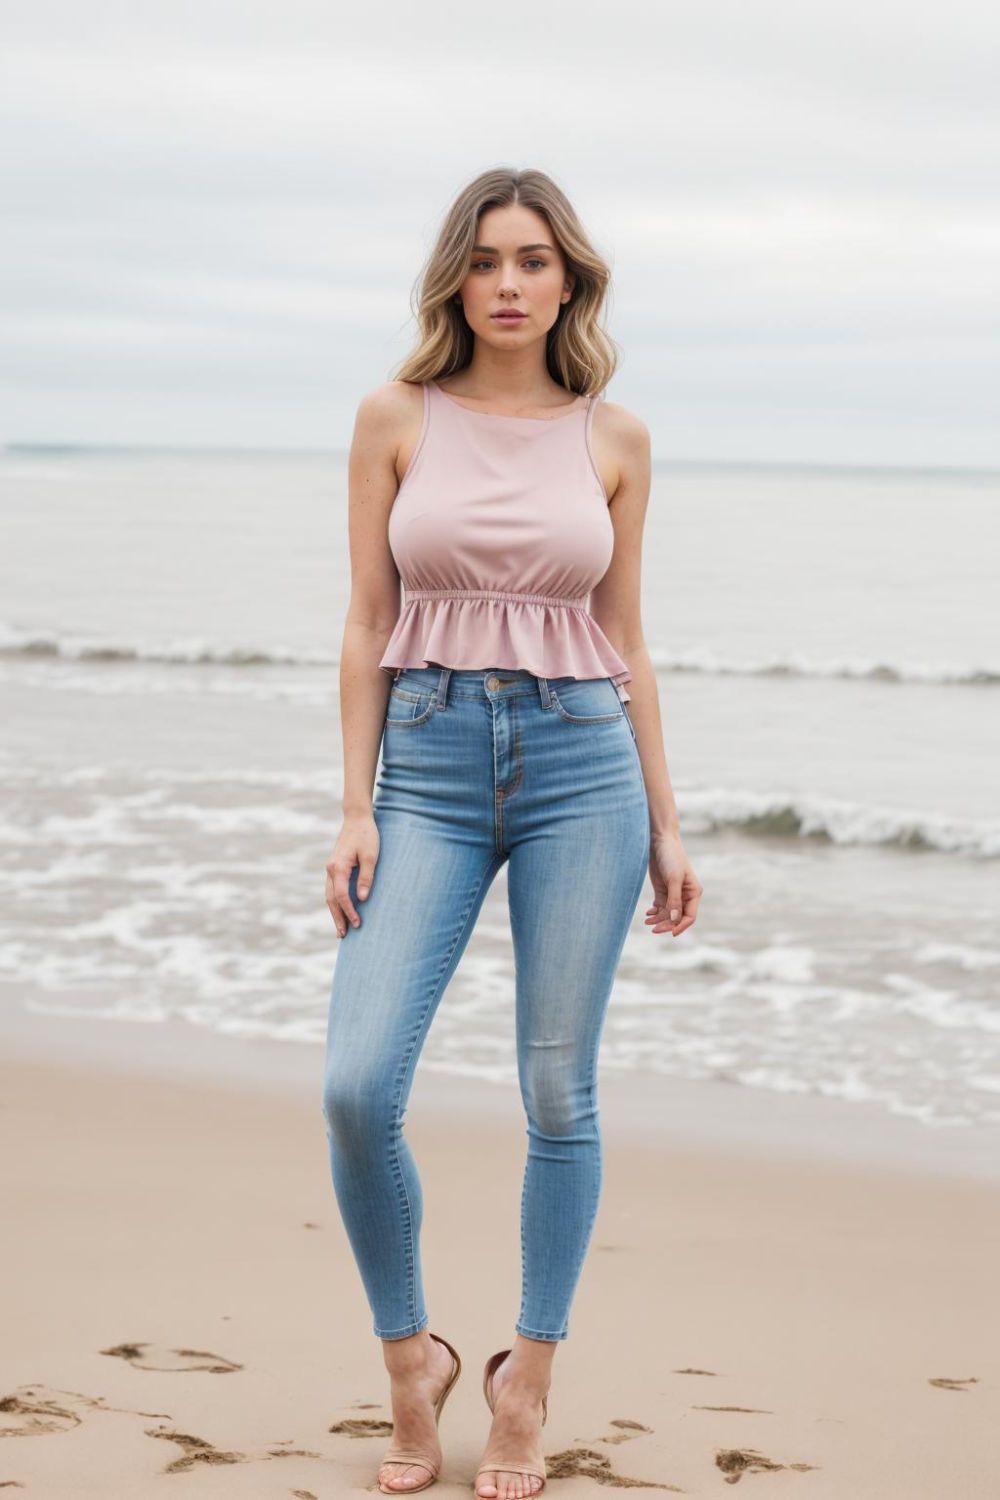 classic peplum top and skinny jeans